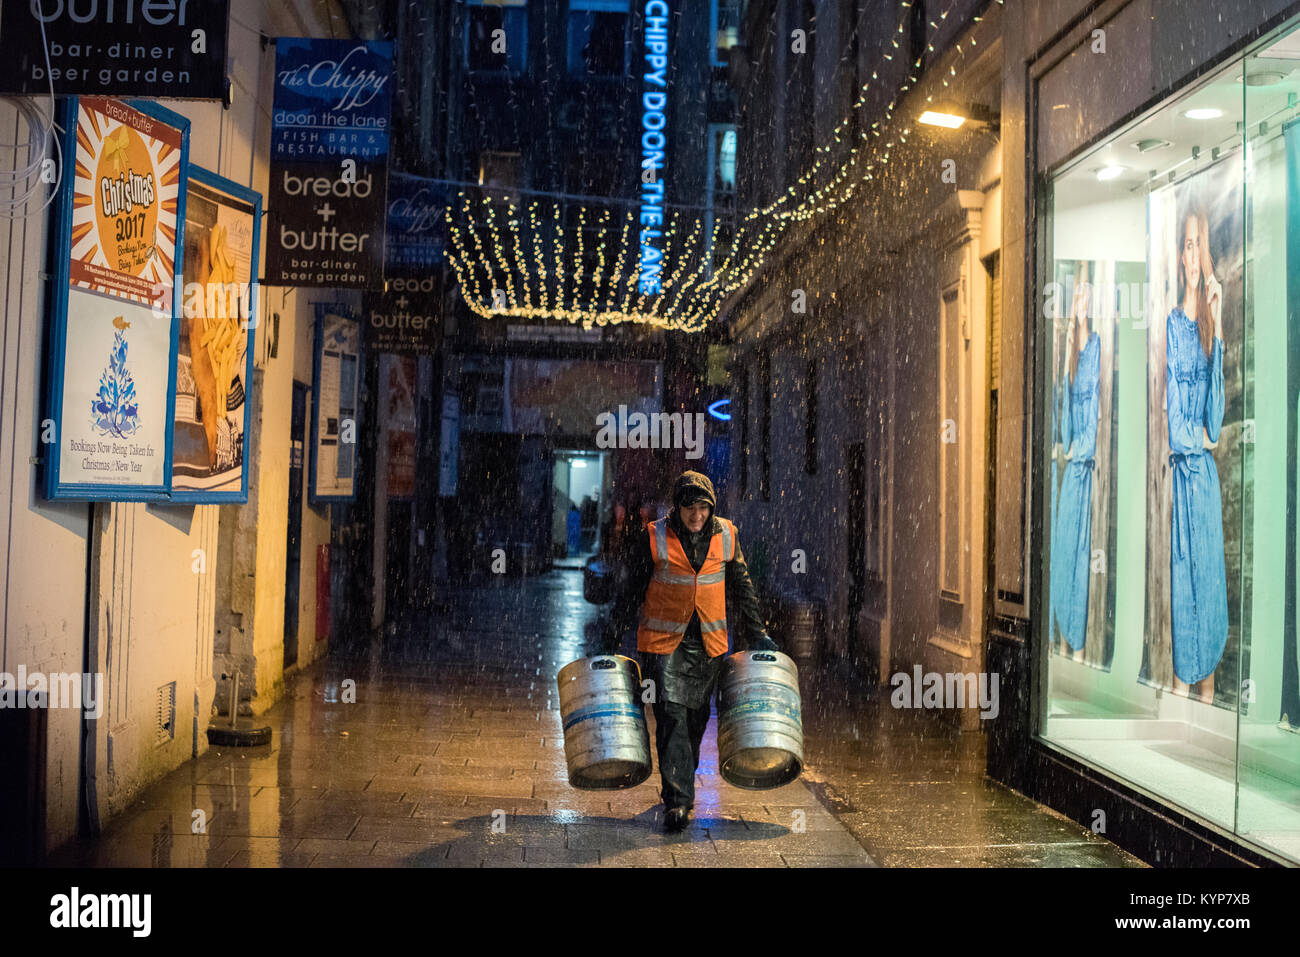 Glasgow, UK. 16th Jan, 2018. UK Weather. Workers stock up bars and restaurants in the freezing weather. Credit: Tony Clerkson/Alamy Live News Stock Photo